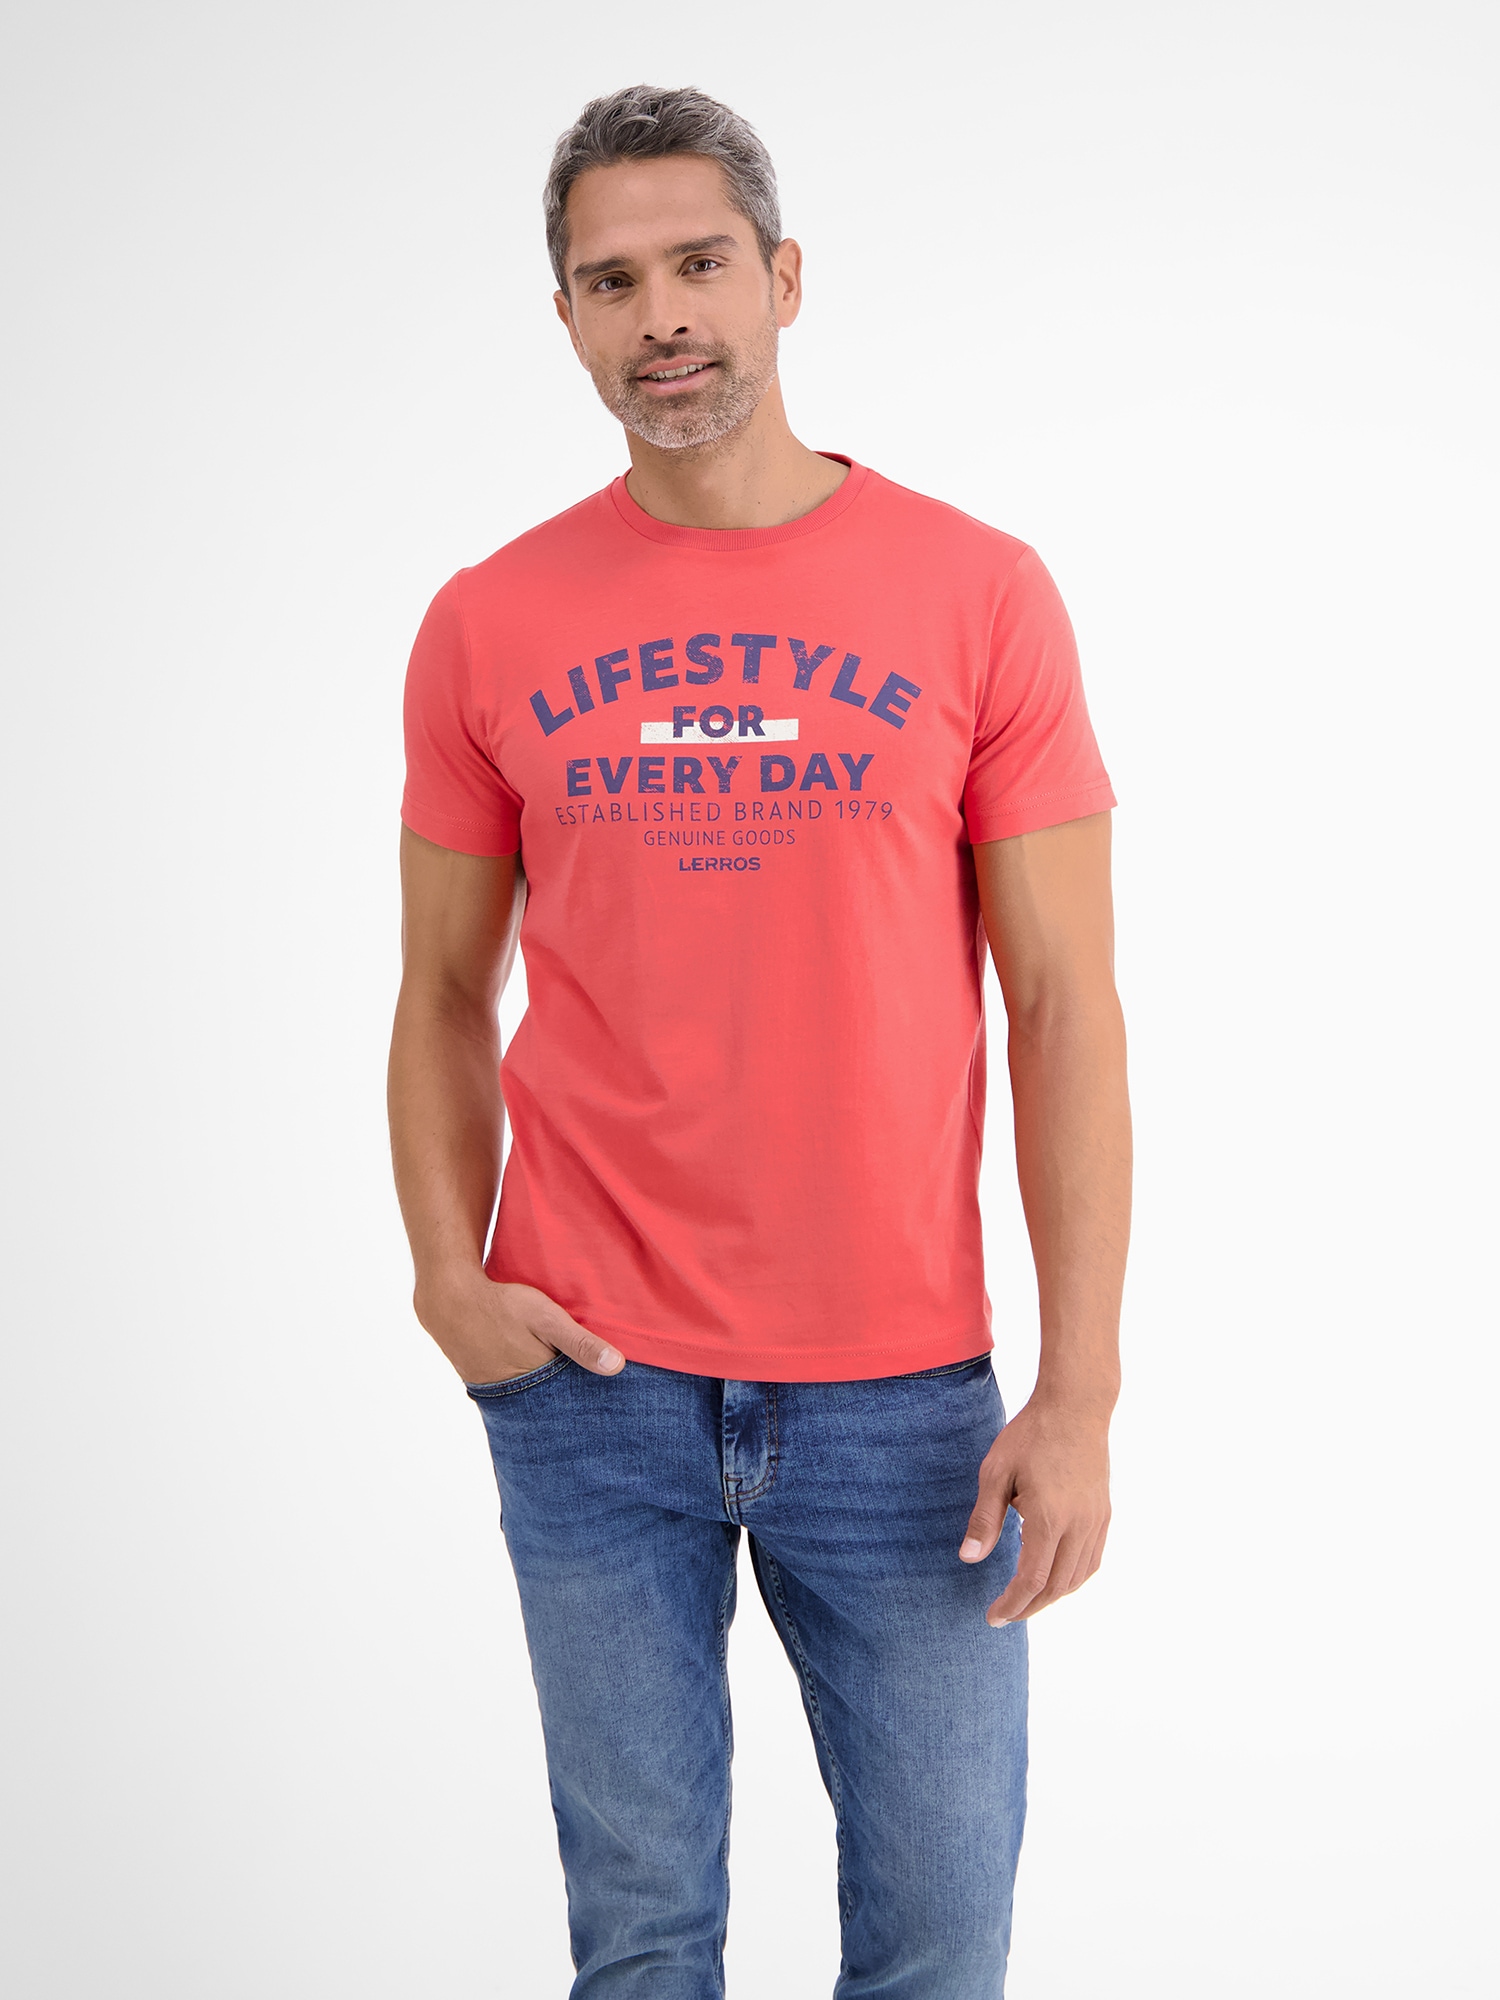 day*« bei »LERROS LERROS *Lifestyle T-Shirt for every ♕ T-Shirt